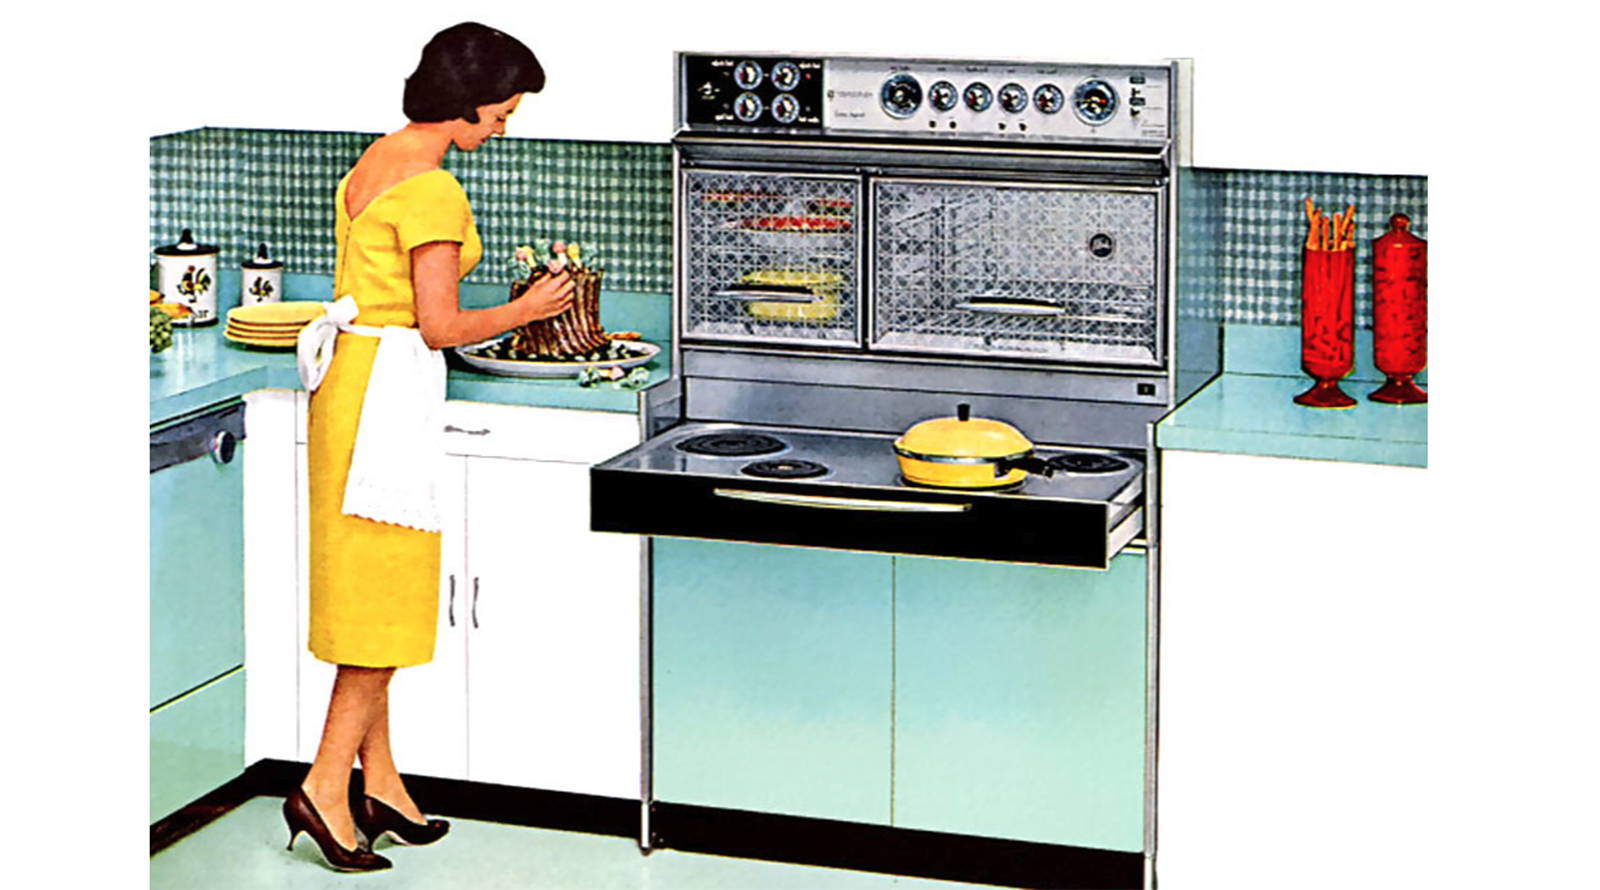 8 vintage sixties kitchens with Flair ranges: Pull-out electric stoves &  glass oven doors that opened upwards - Click Americana